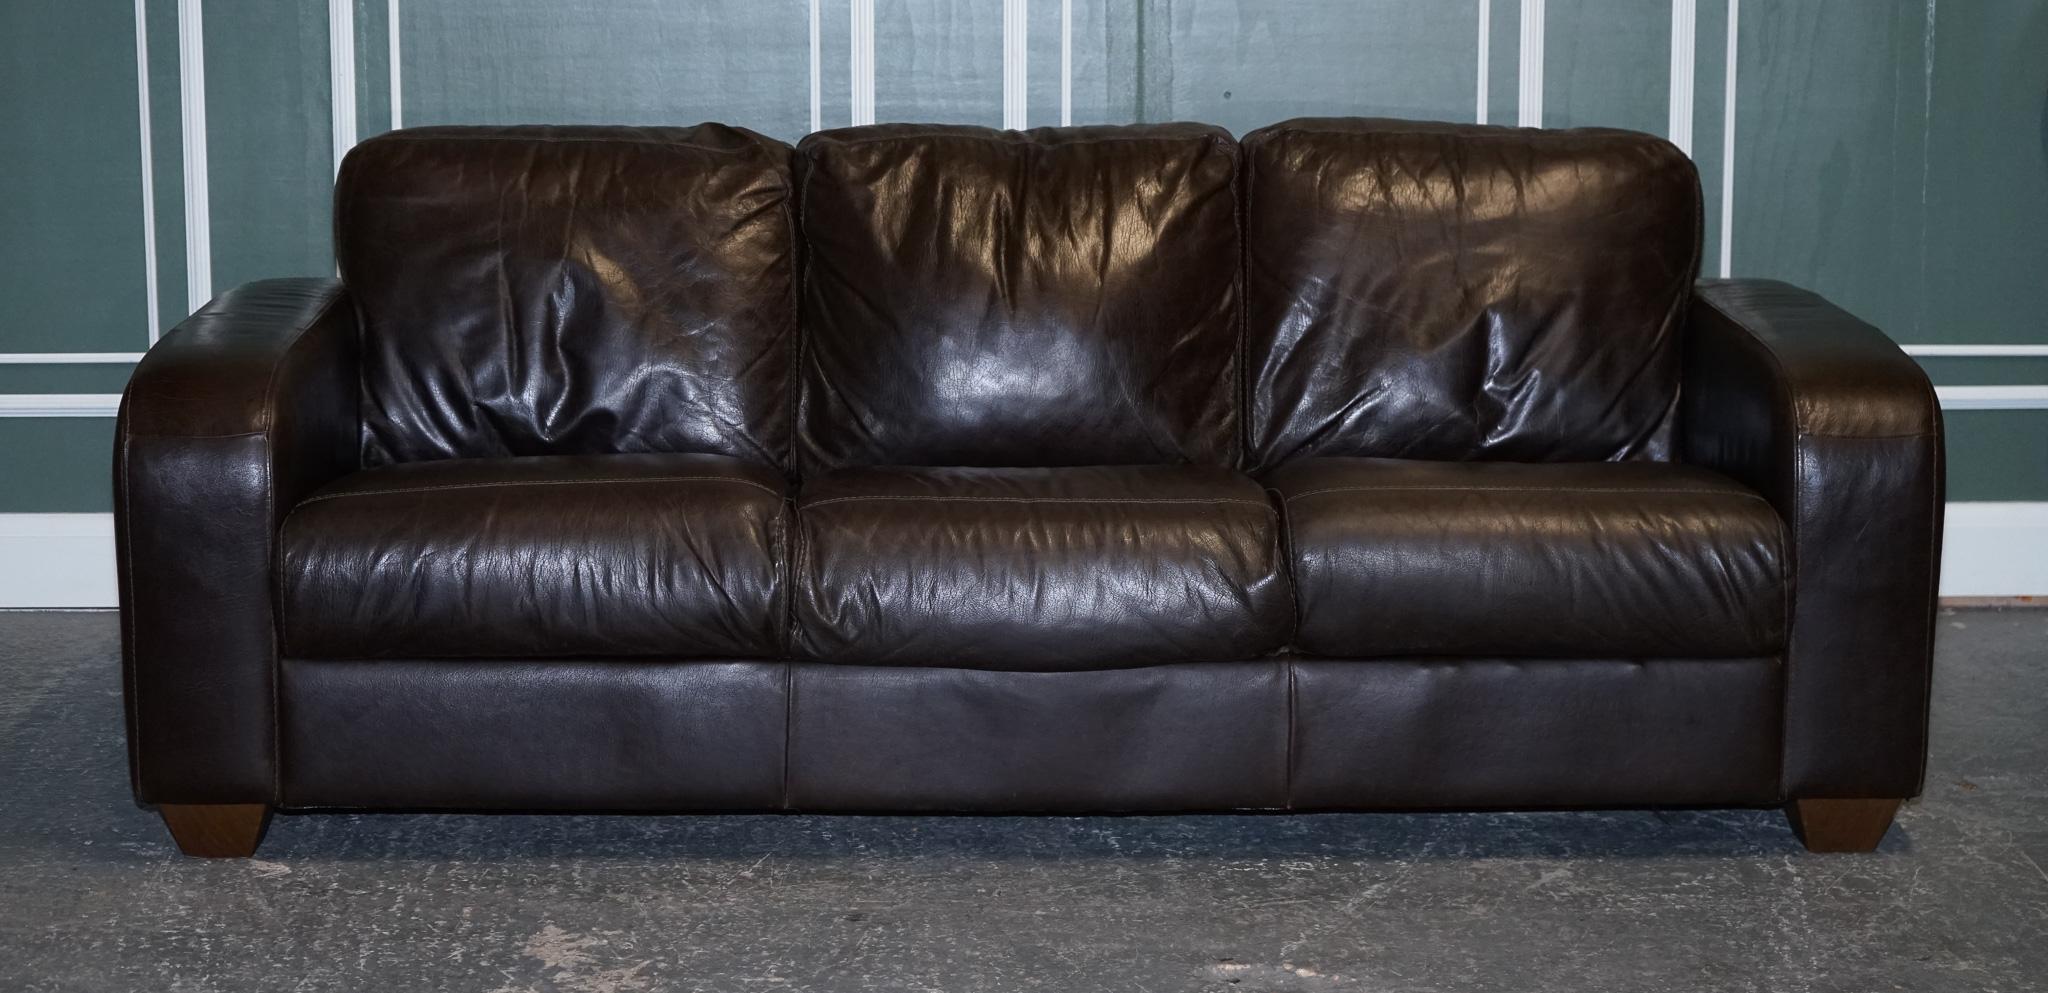 British STUNNING VINTAGE CHOCOLATE BROWN LEATHER THREE SEATER SOFA BY SOFITALiA For Sale